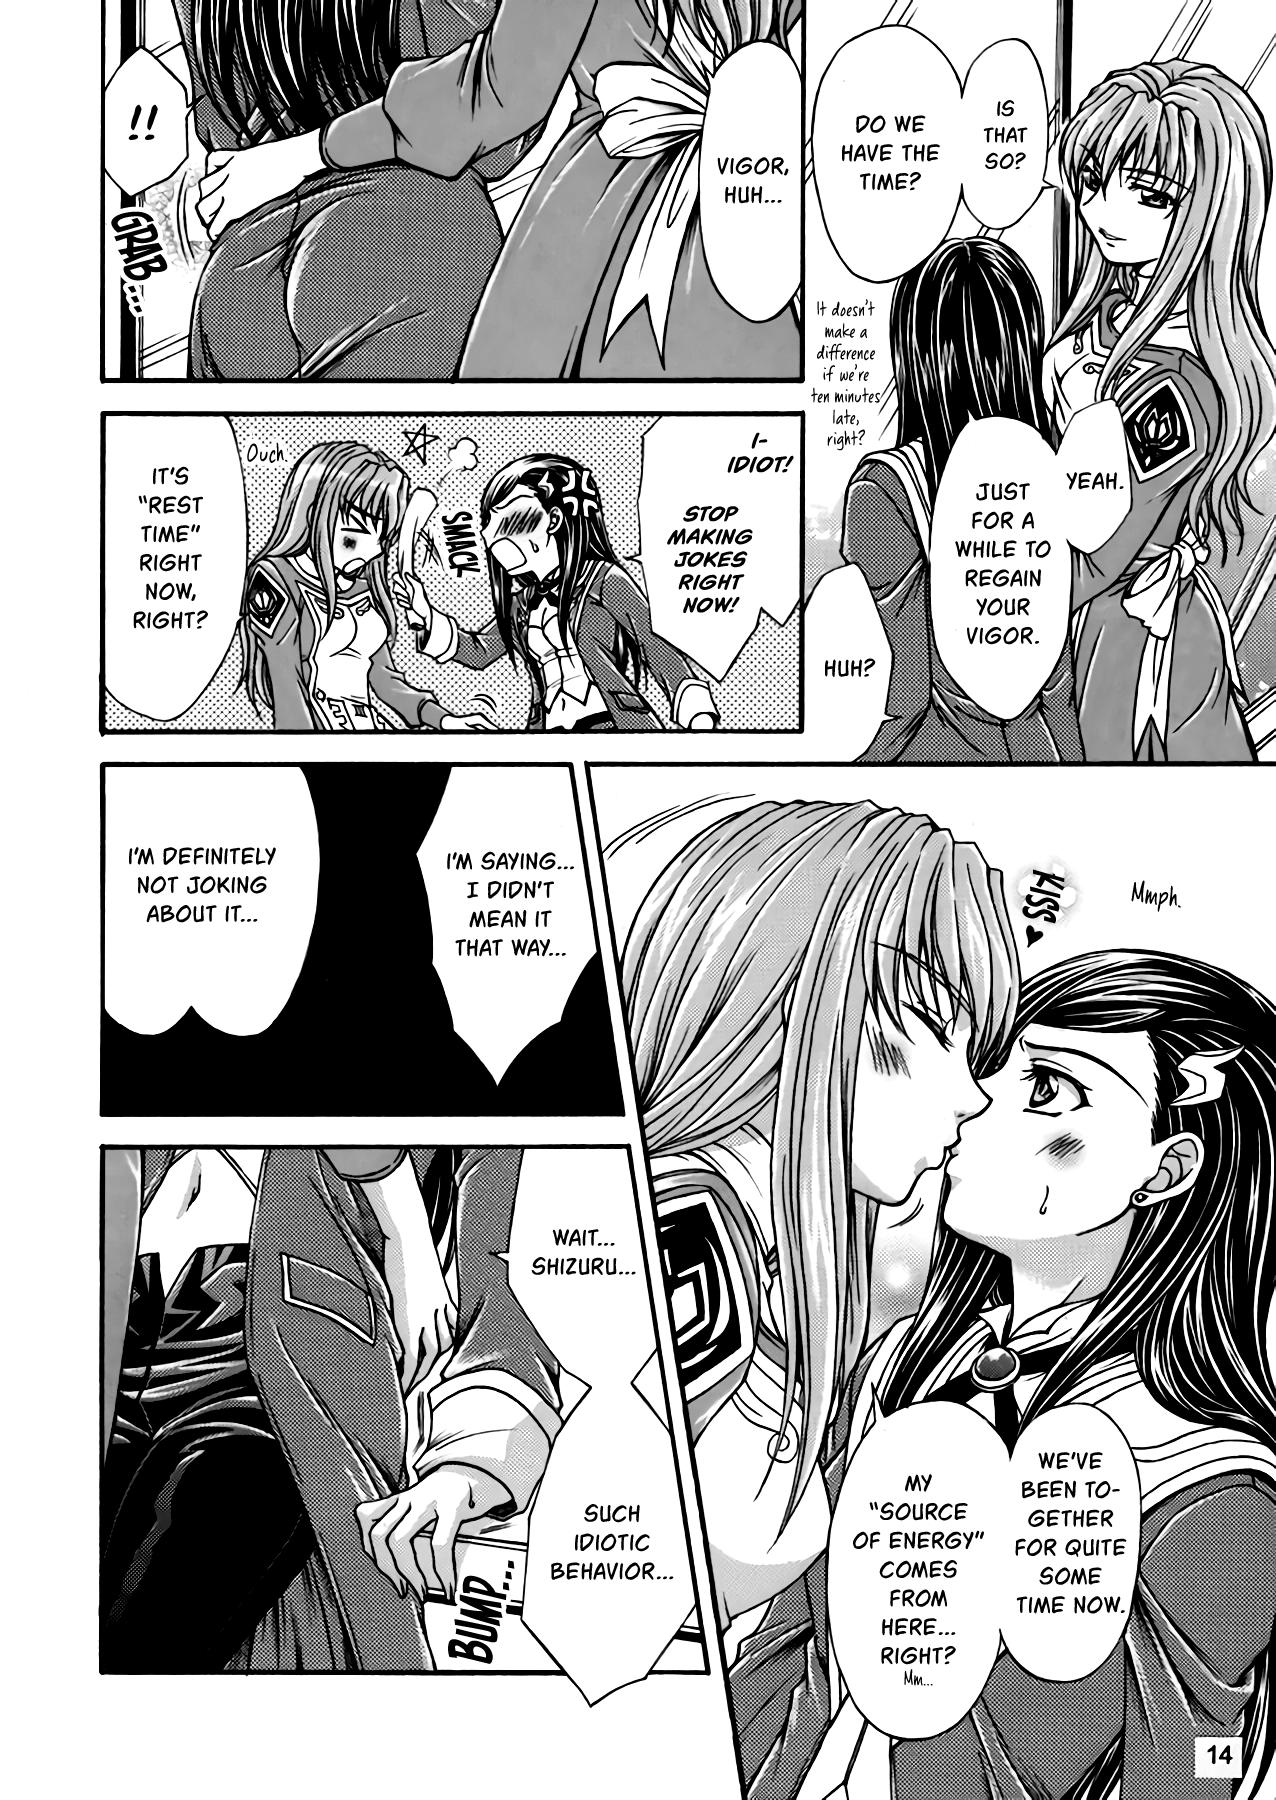 Ass Fetish Alpha Syndrome - Mai-otome Rubbing - Page 2